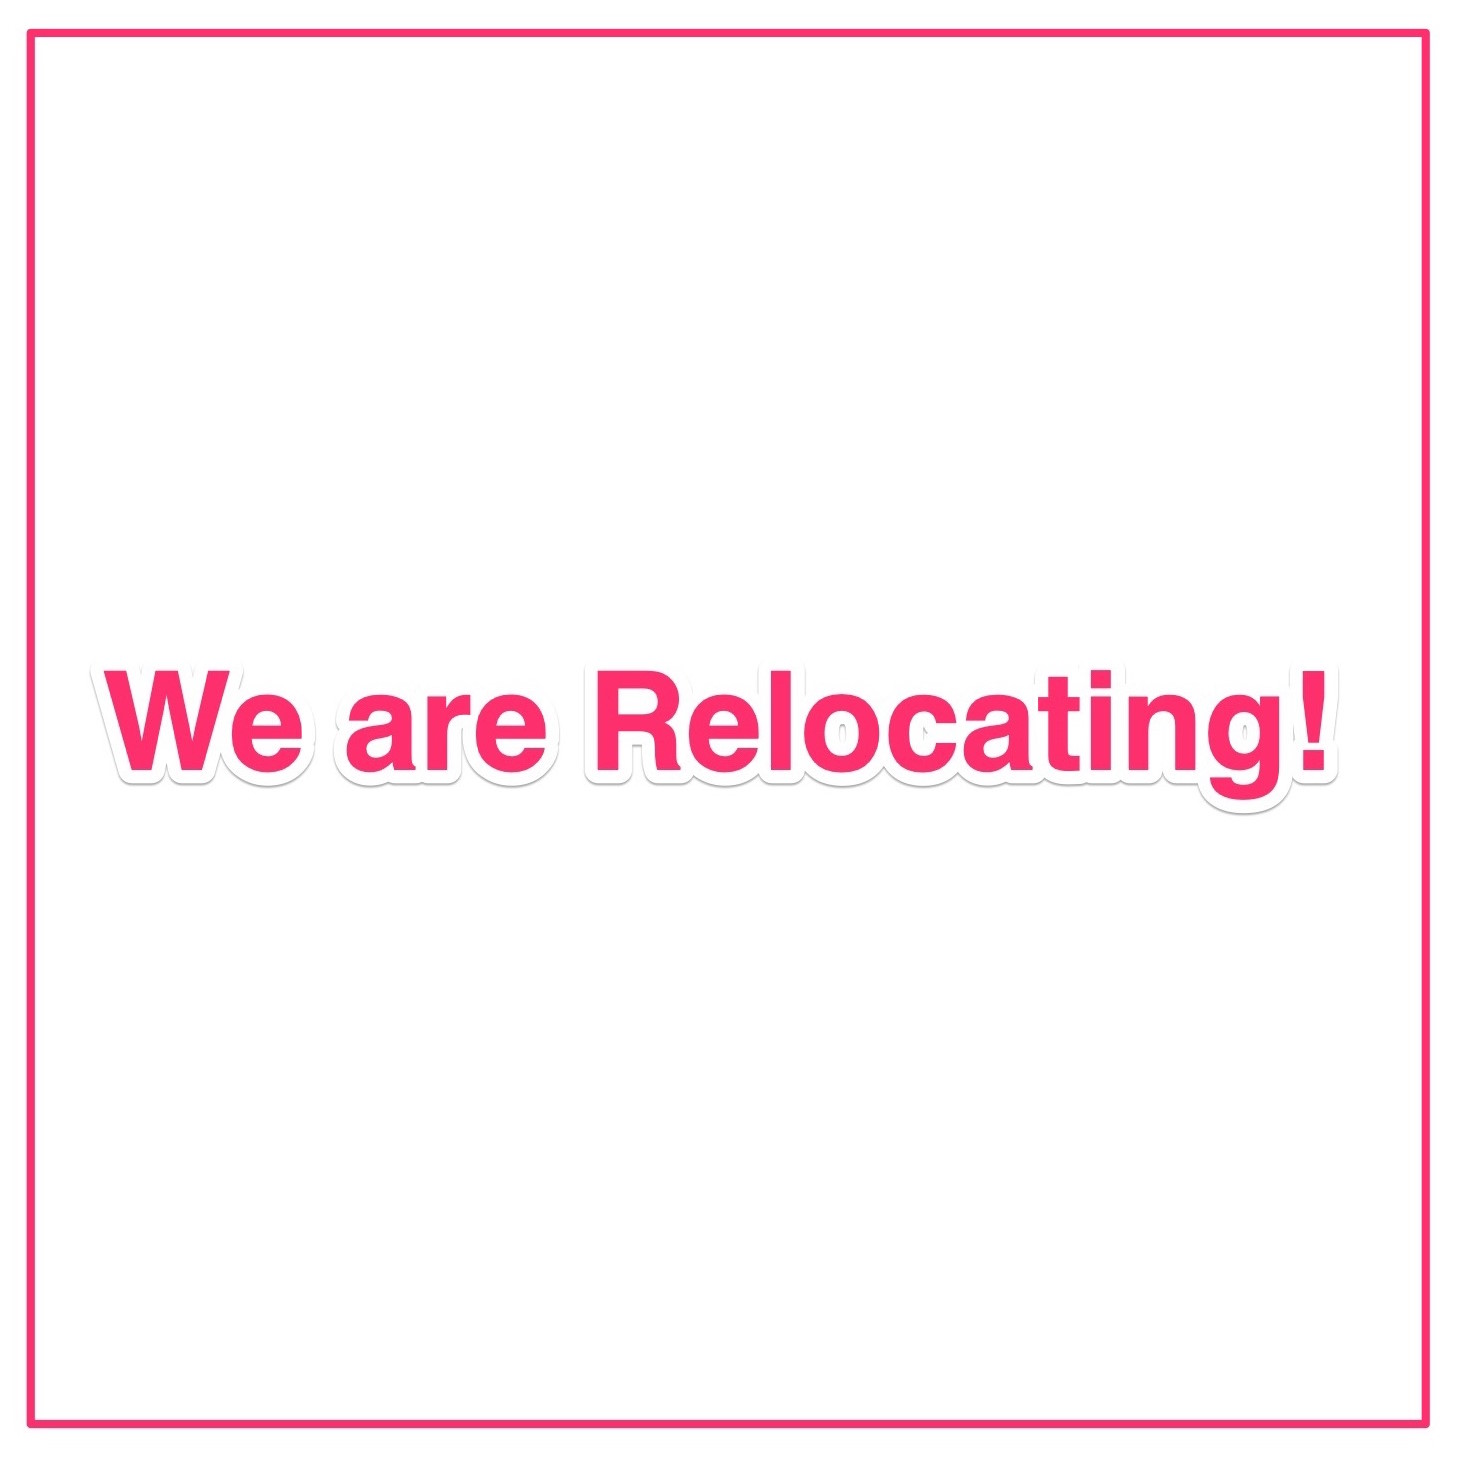 We are Relocating